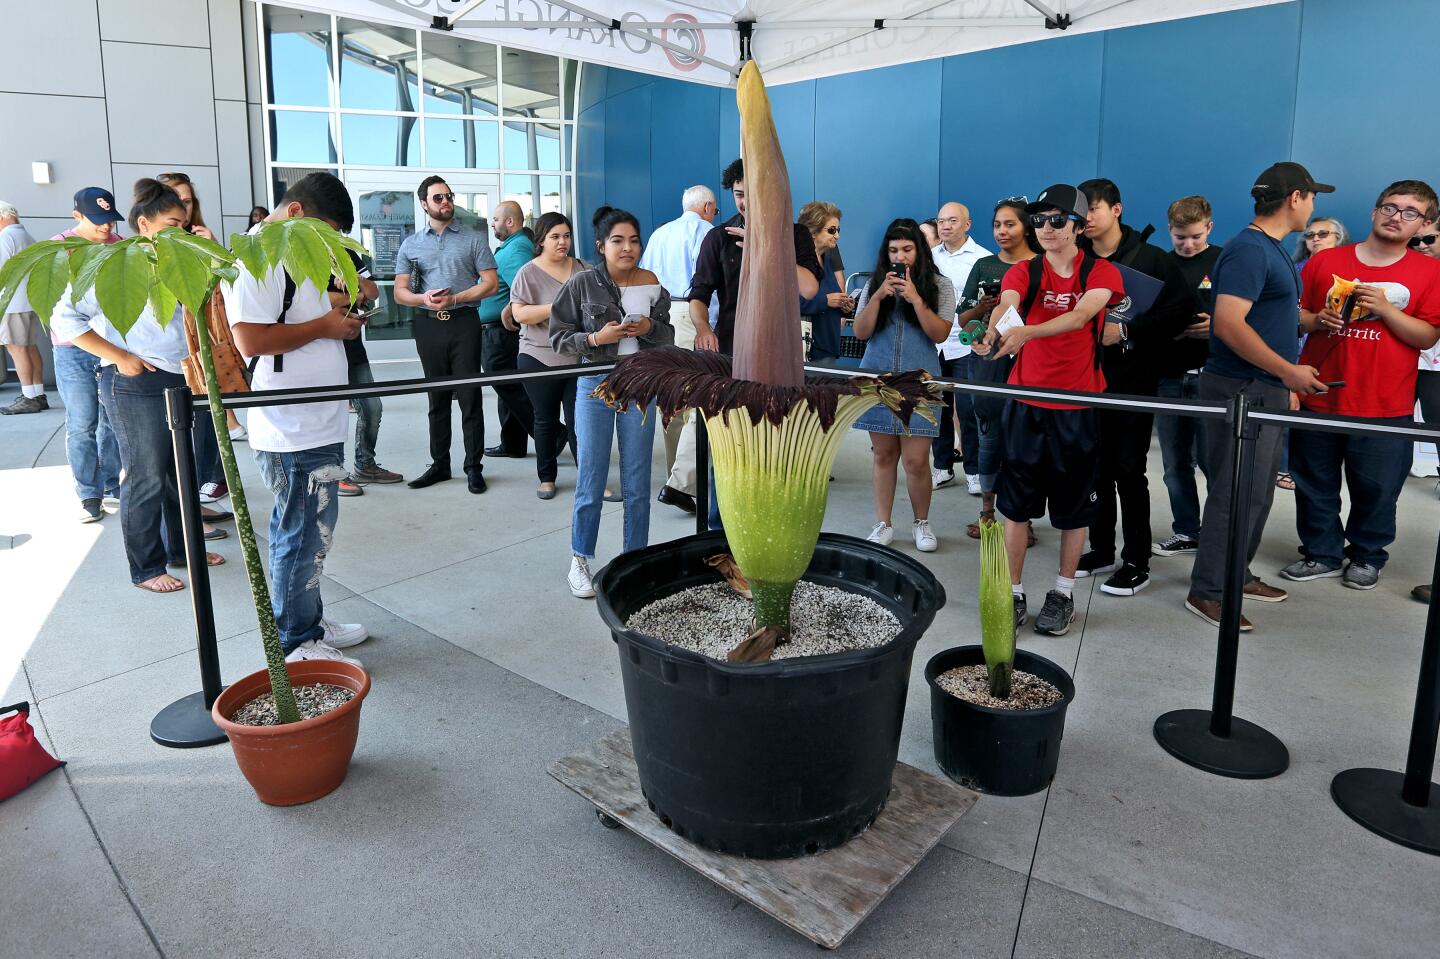 People gather to see a rare Inflorescense “Corpse Flower,” Amorphophallus titanium, which opened last night and is giving an pungent odor, at Orange Coast College in Costa Mesa on Friday, Aug. 16, 2019. The flower will close in 24 to 48 hours. The compound leaf form, at left, is what the plant looks like most of the time. This plant came from the Huntington Botanical Gardens in2006 as a small plant corm, or root ball. It first flowered in 2014 and this is the second time it flowers. It is about four feet tall and the small one next to it is an offset of the same plant which separated from the corm in 2015. The small one will bloom in about one week.